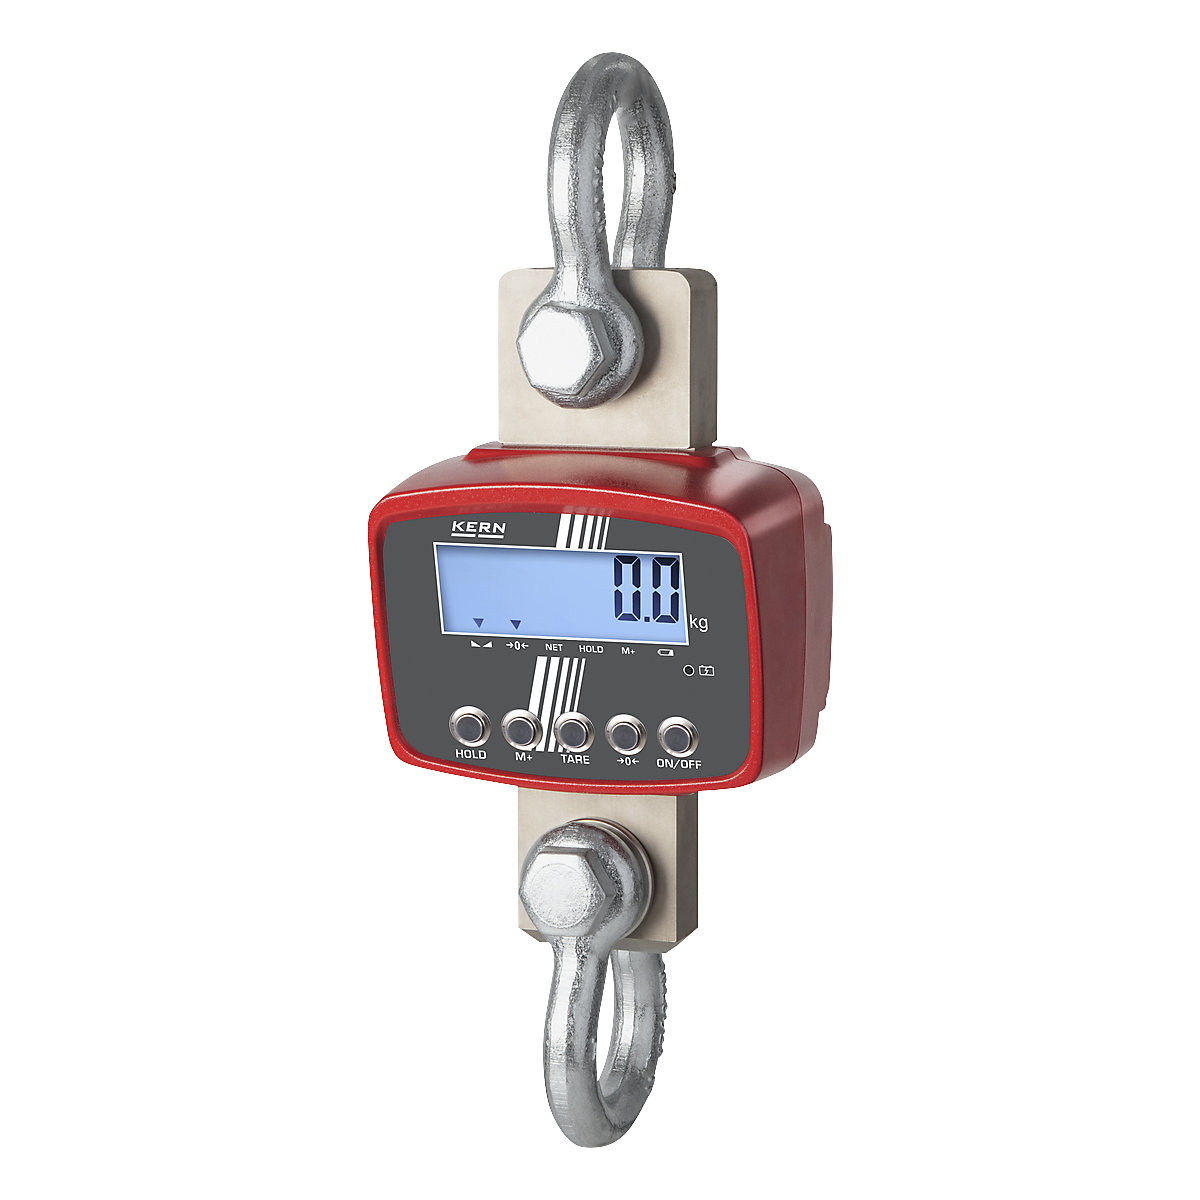 Crane scales – KERN, high resolution, weighing range up to 3000 kg, read-out accuracy 200 / 500 / 1000 g-4